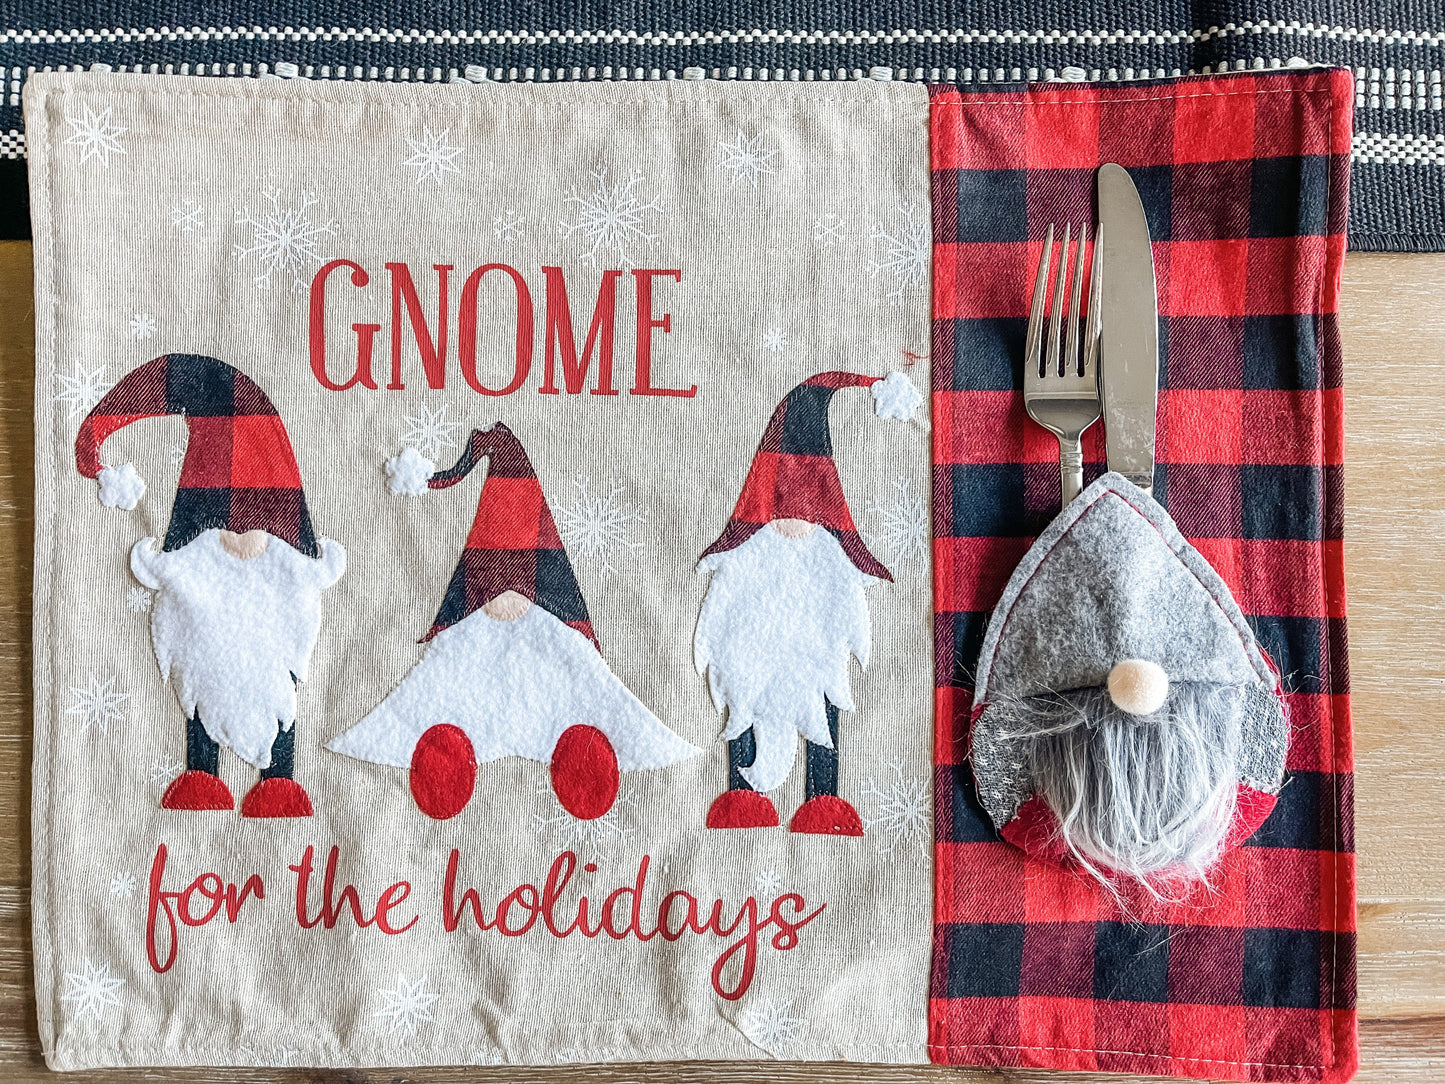 Christmas Placemats Set of 4 - Gnome for the Holidays - 